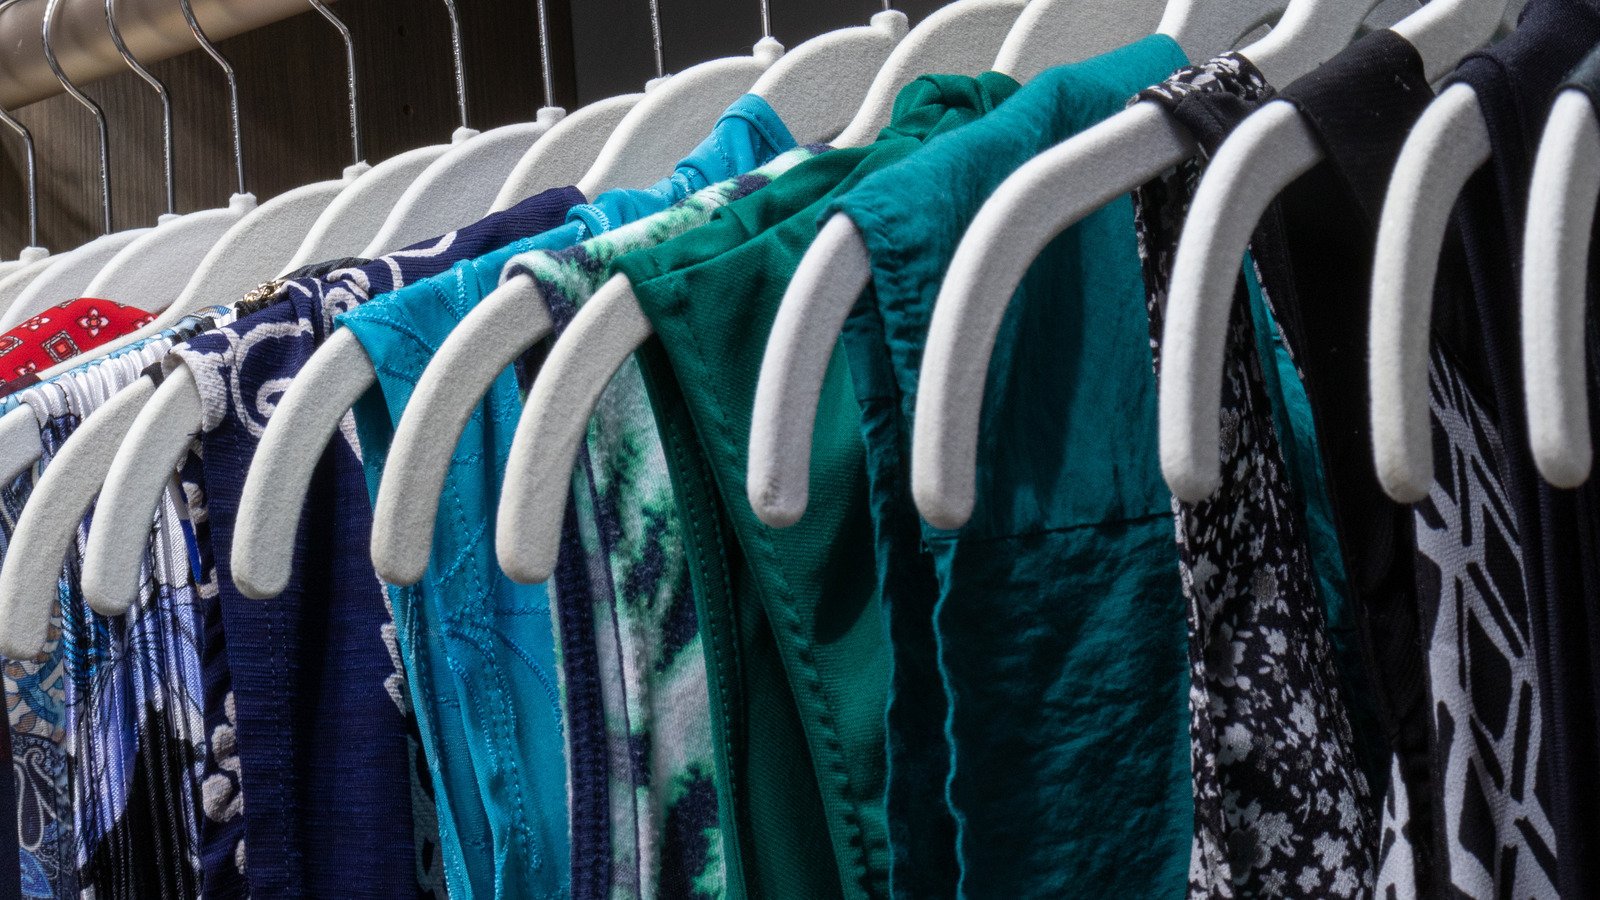 15 Items You Can Use To Organize Your Bedroom Closet